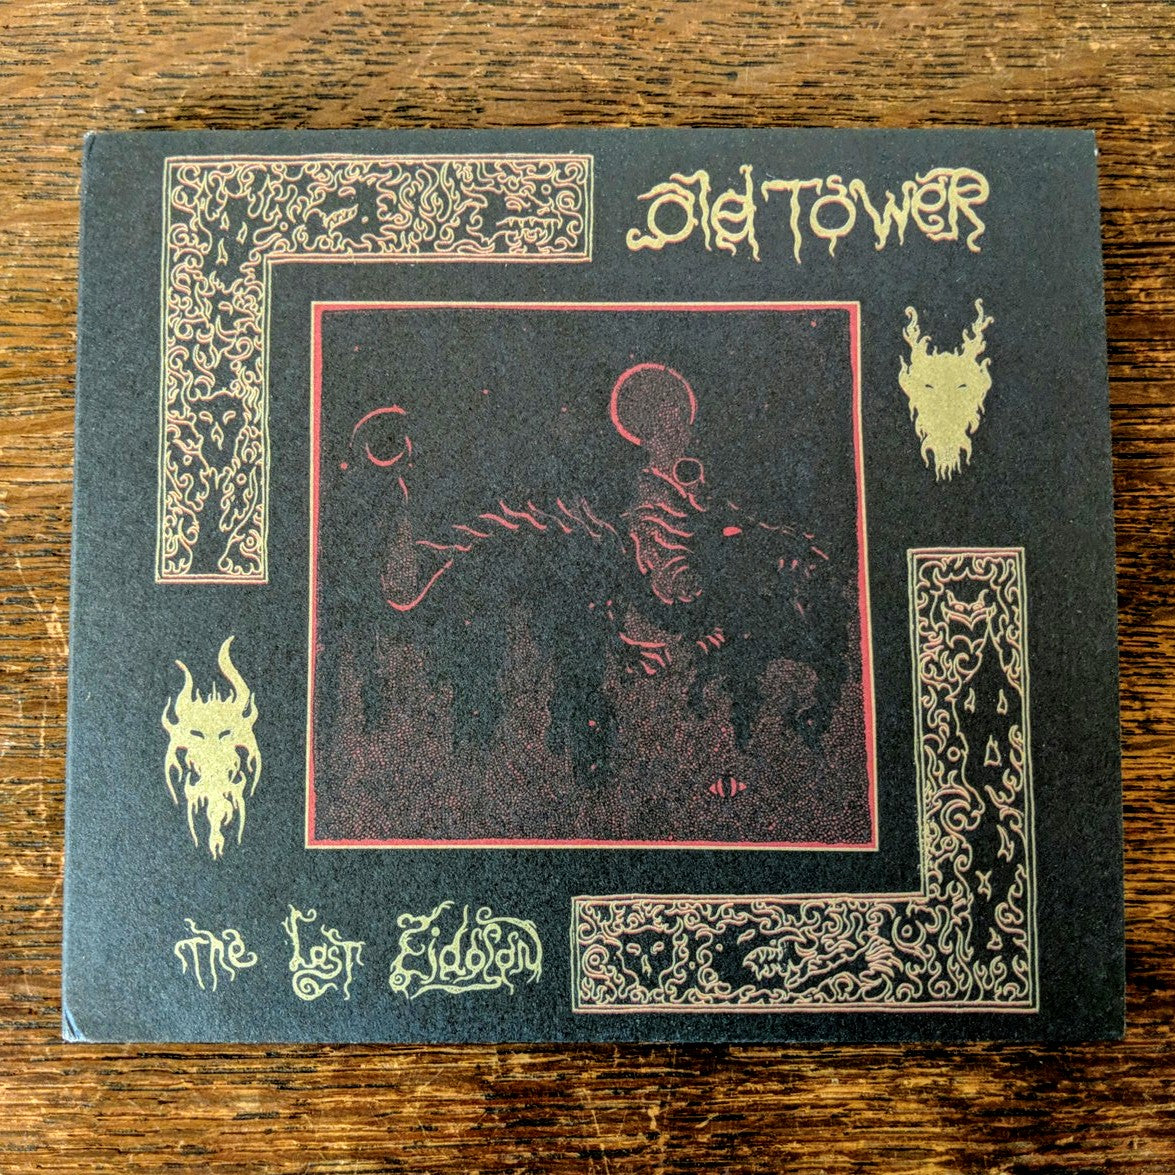 [SOLD OUT] OLD TOWER "The Last Eidolon" CD